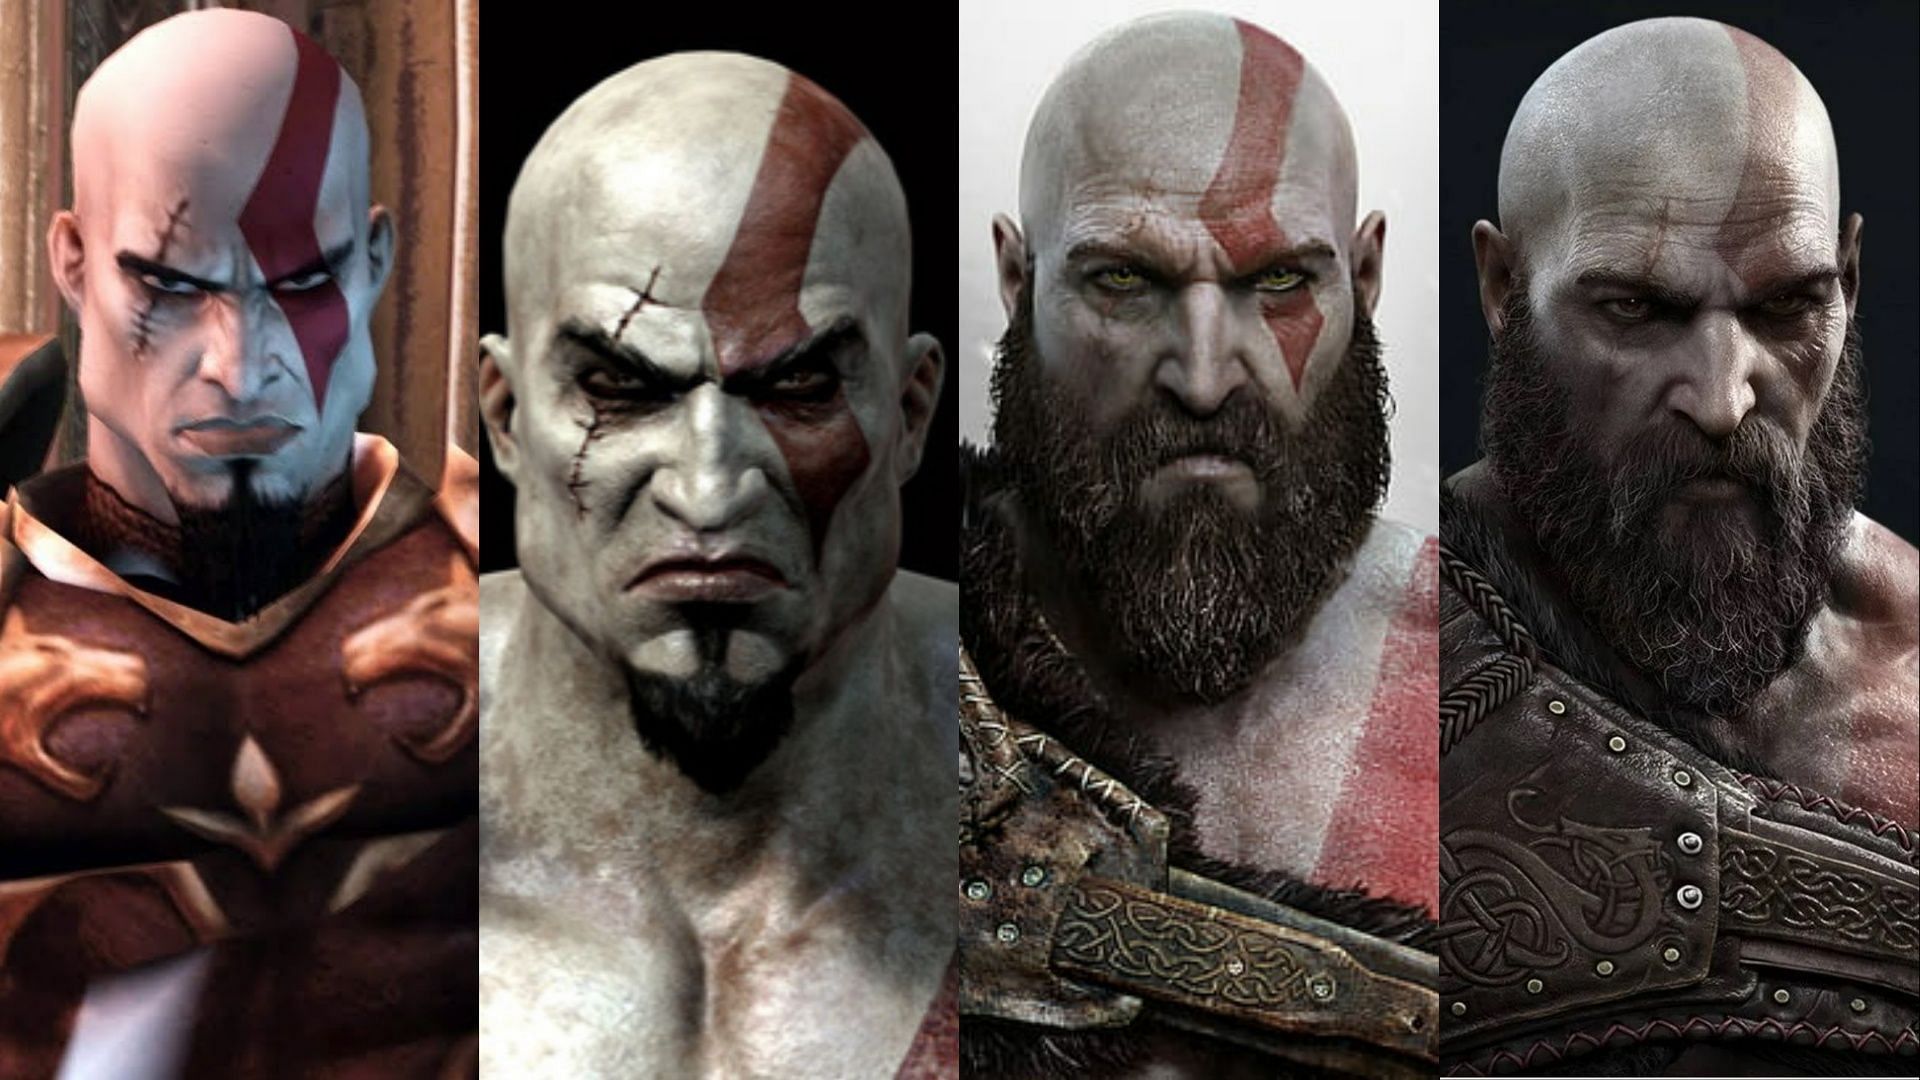 God of War: Ghost of Sparta Engages Battle with Release Details